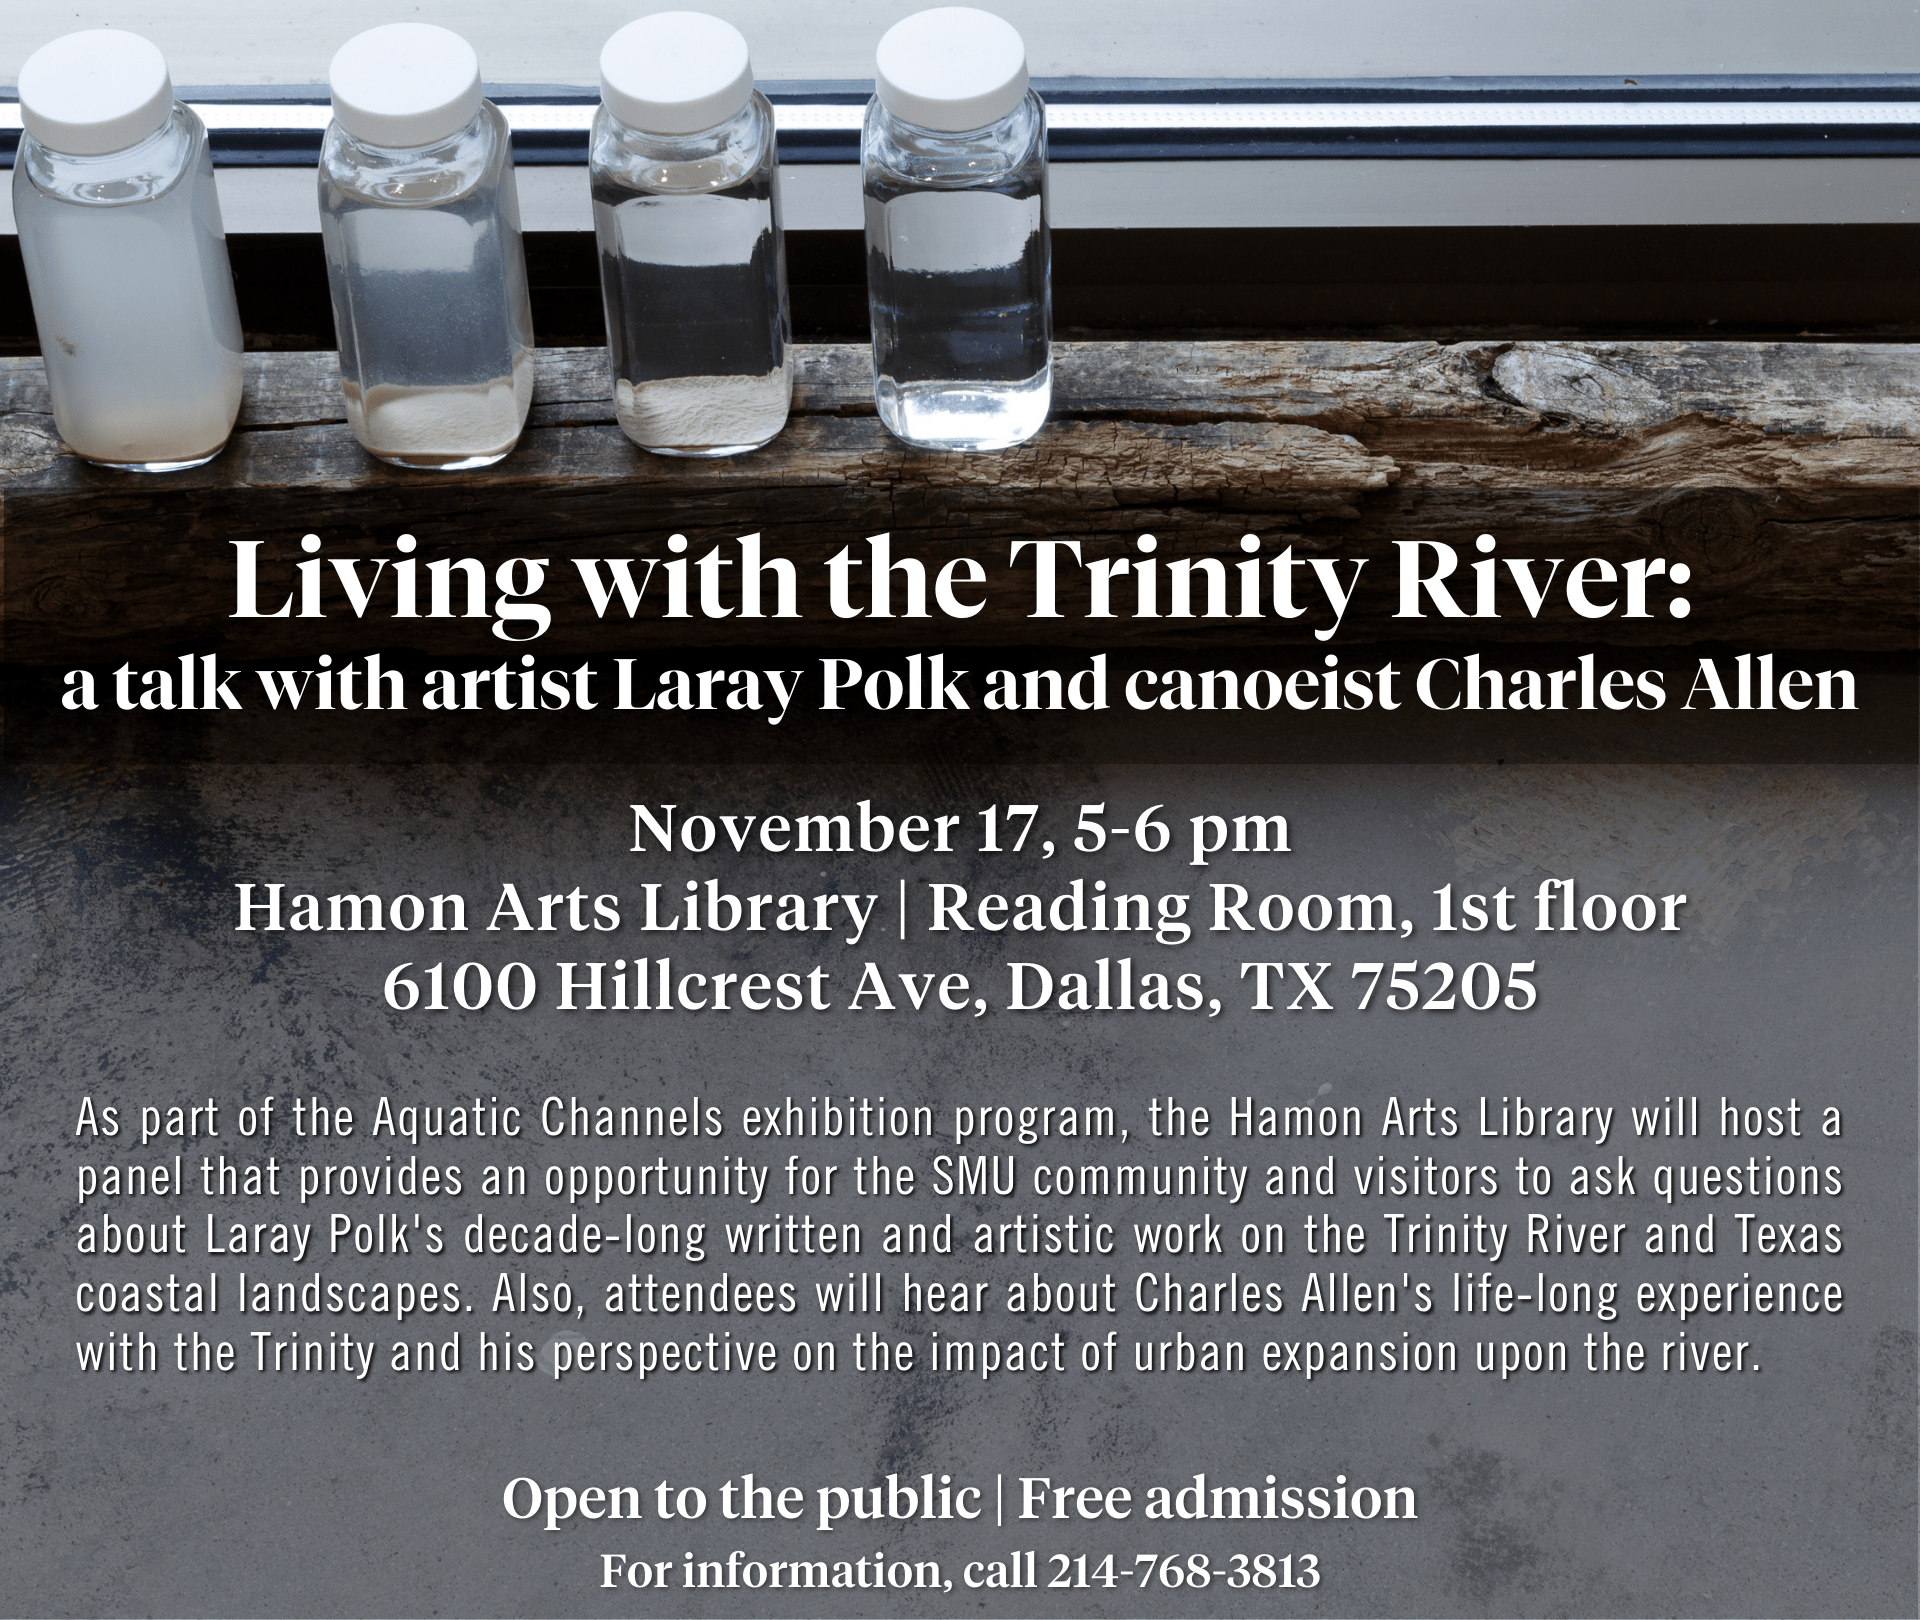 Living with the Trinity River panel discussion on Nov. 17, 5 - 6 pm